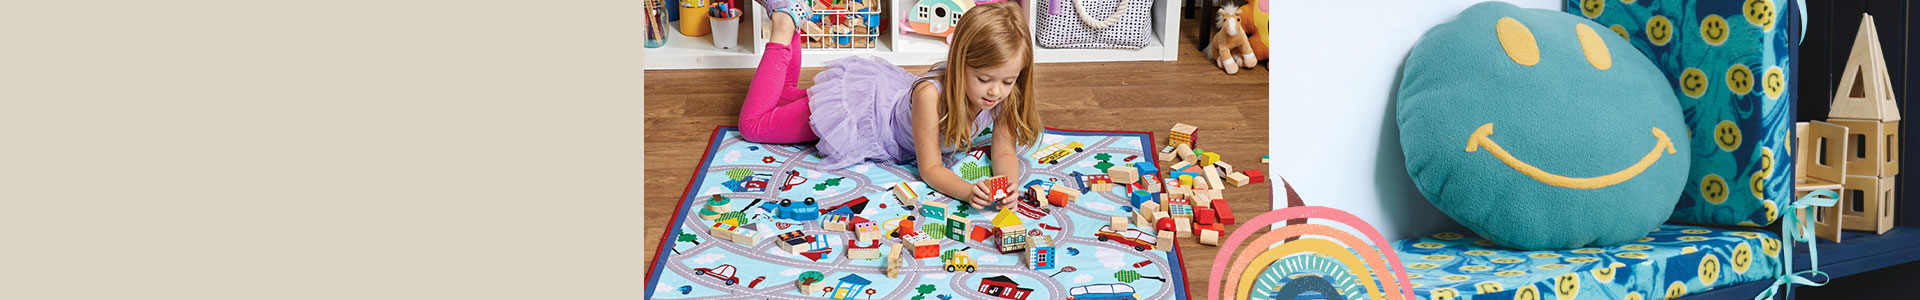 Find everything you need at JOANN for Kids Cotton Fabric